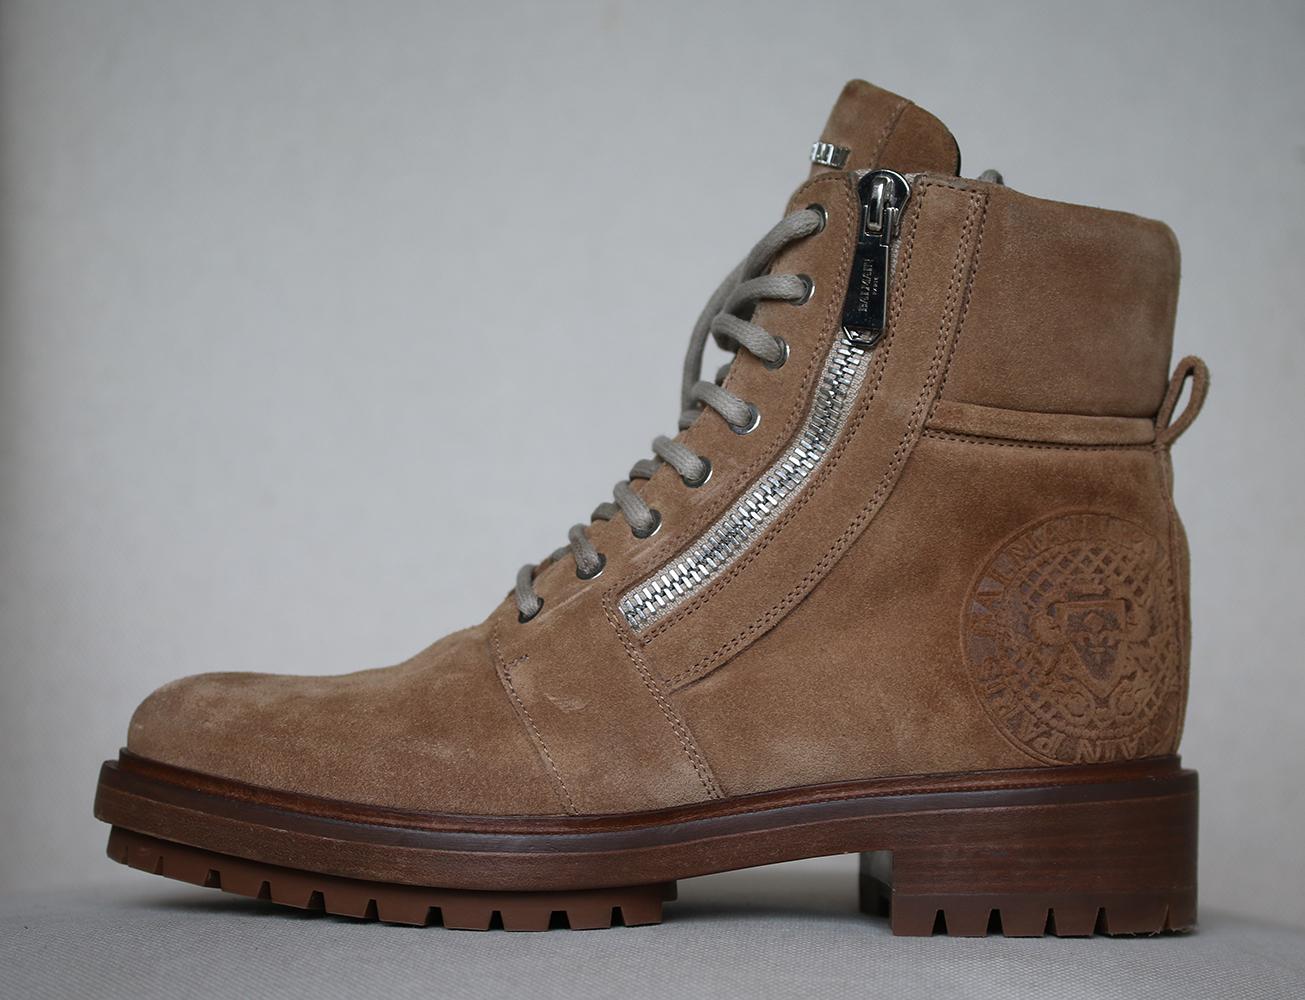 Men's Balmain boots. 35mm Heel. Shaft: 18 cm. Side zip closure. Reinforced eyelets. Back pull loop. Metal logo on tongue. Side embossed logo detail. Padded collar. Leather lining. Leather sole with treaded rubber. Made in Italy. 100% Calf. 

Size: